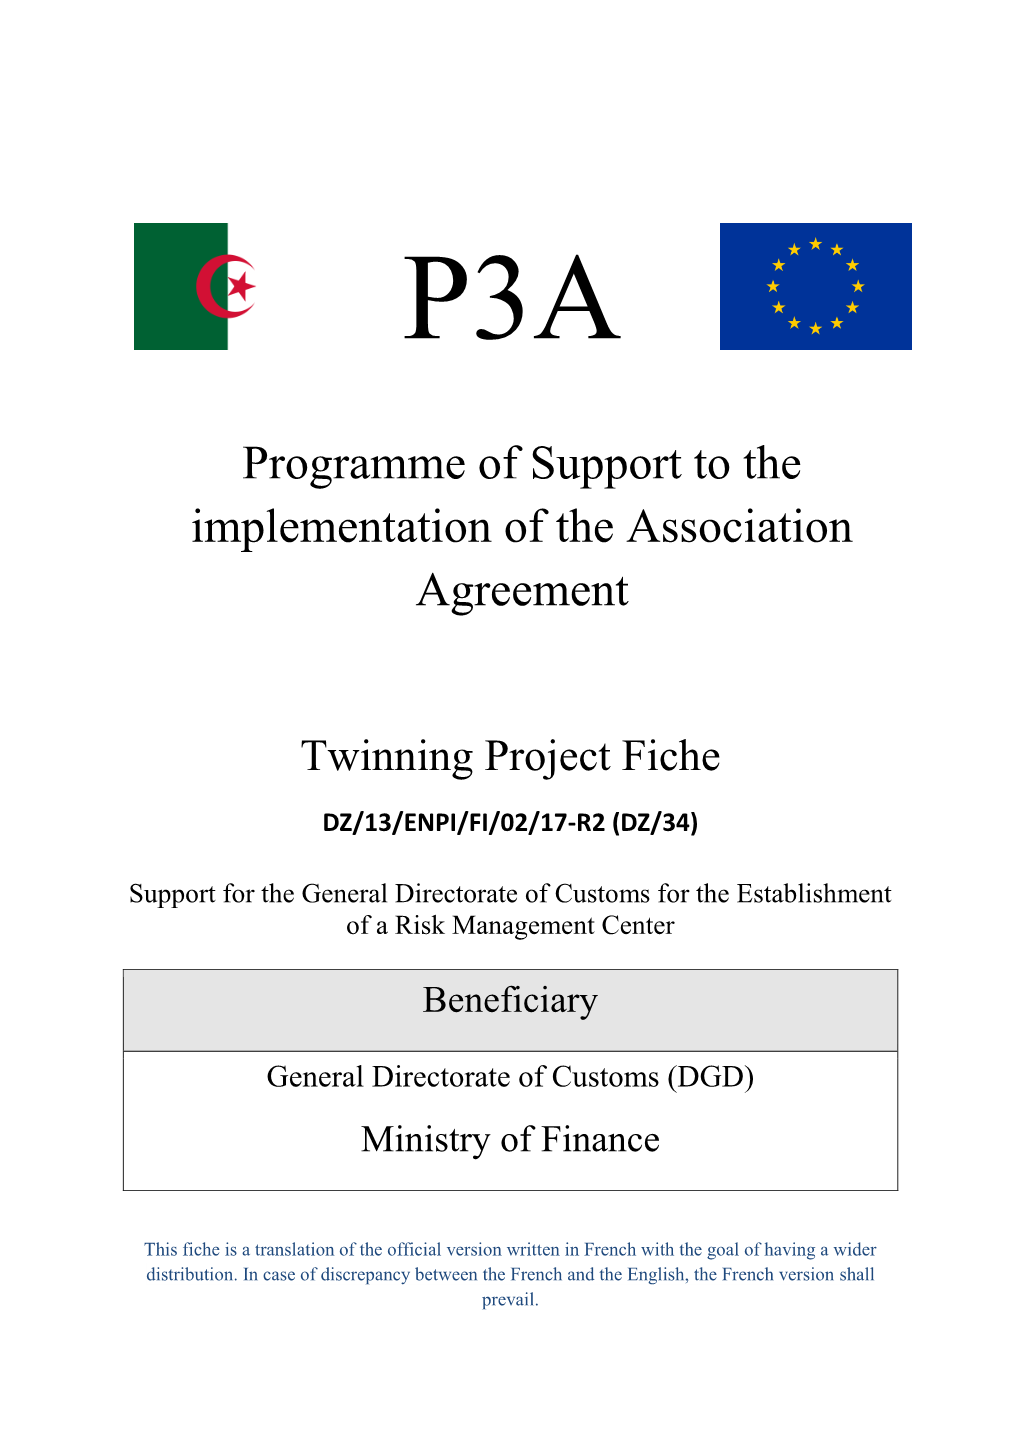 Programme of Support to the Implementation of the Association Agreement